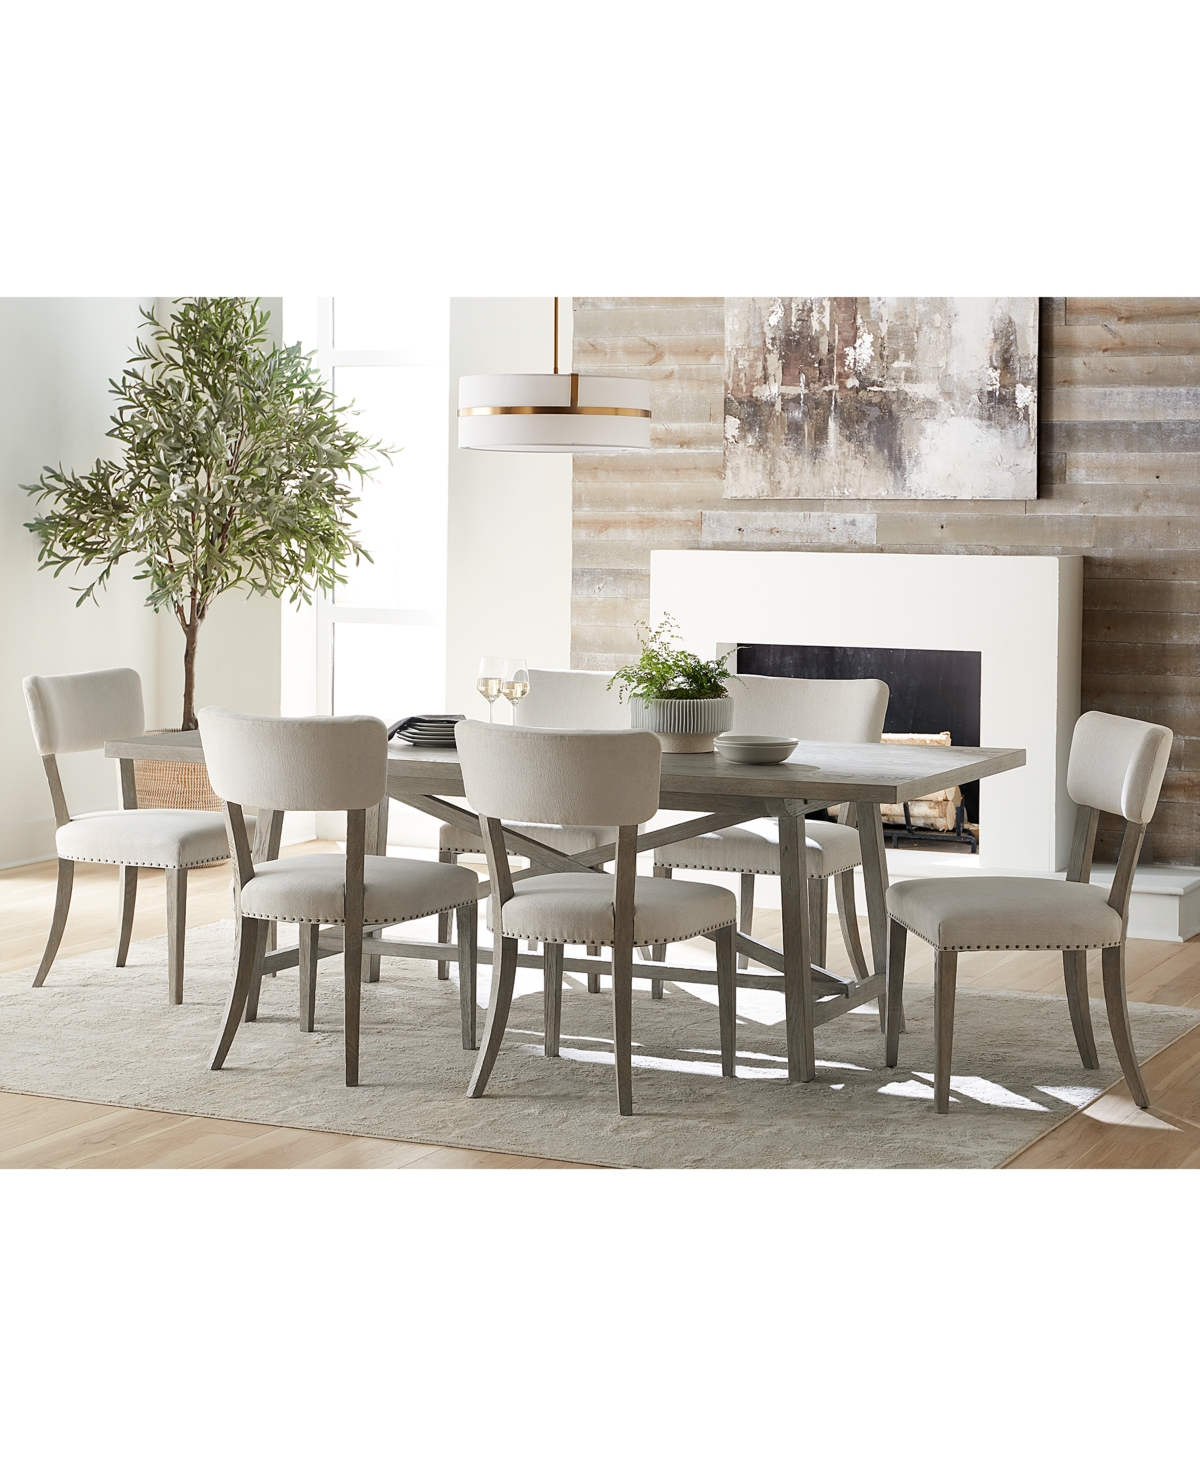 Albion 7-pc. Dining Set (Table and 6 Side Chairs)